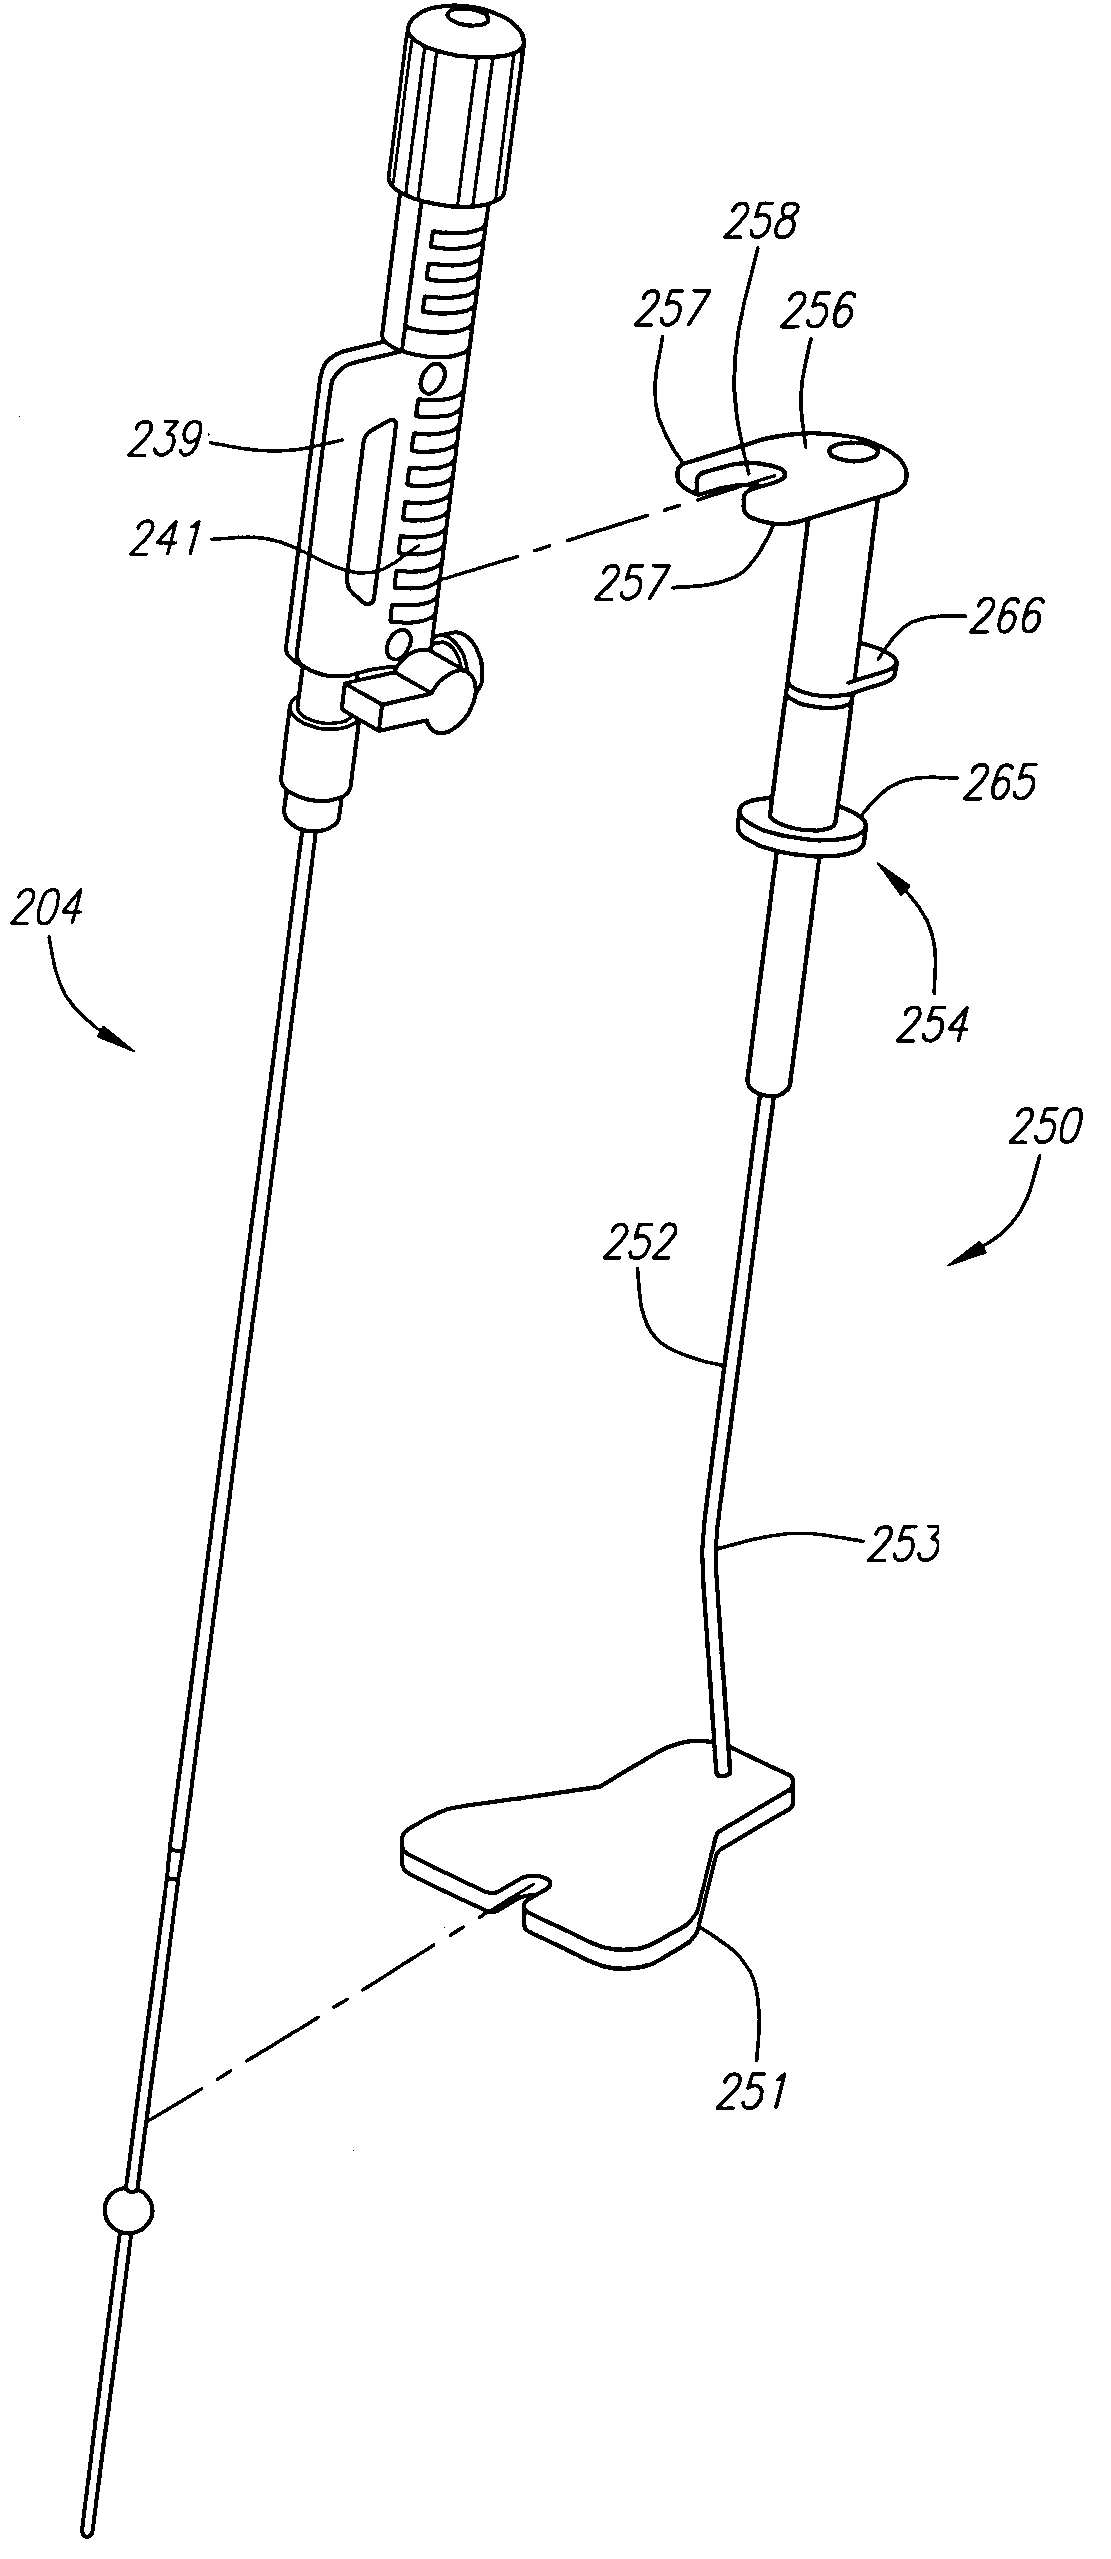 Occlusion member and tensioner apparatus and methods of their use for sealing a vascular puncture